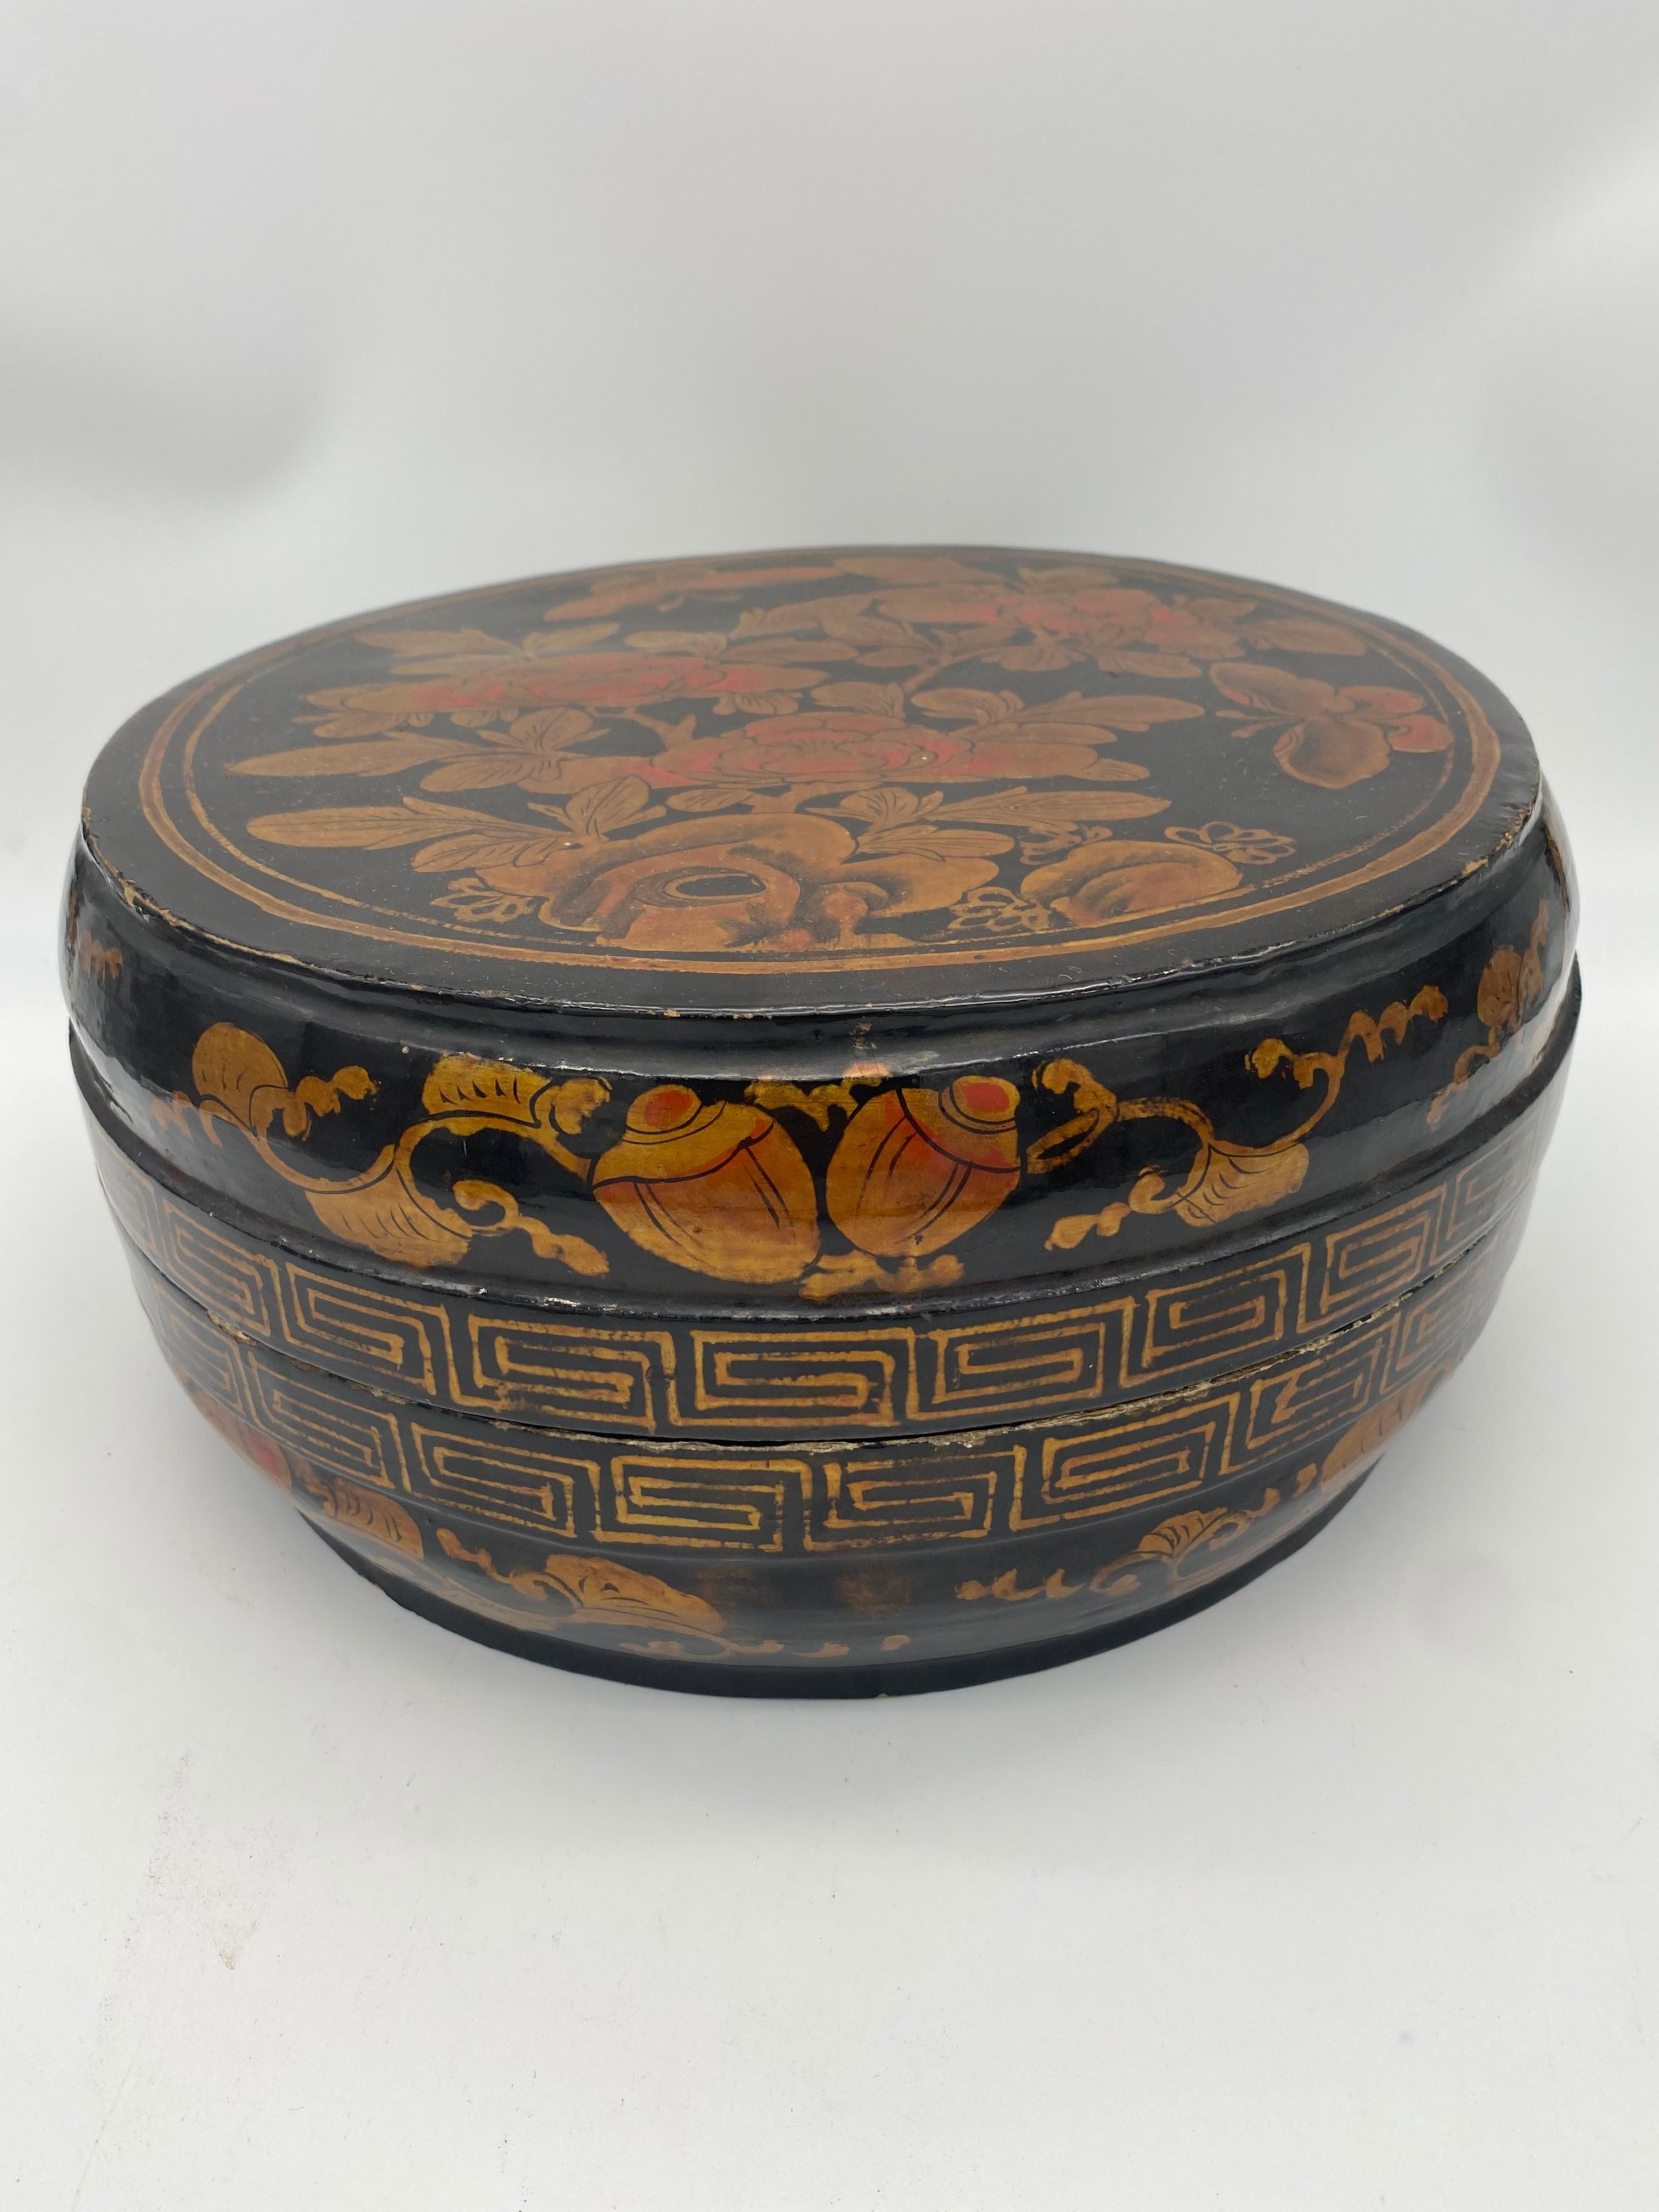 A big golden black lacquer Chinese box, hand paint beautiful flowers.